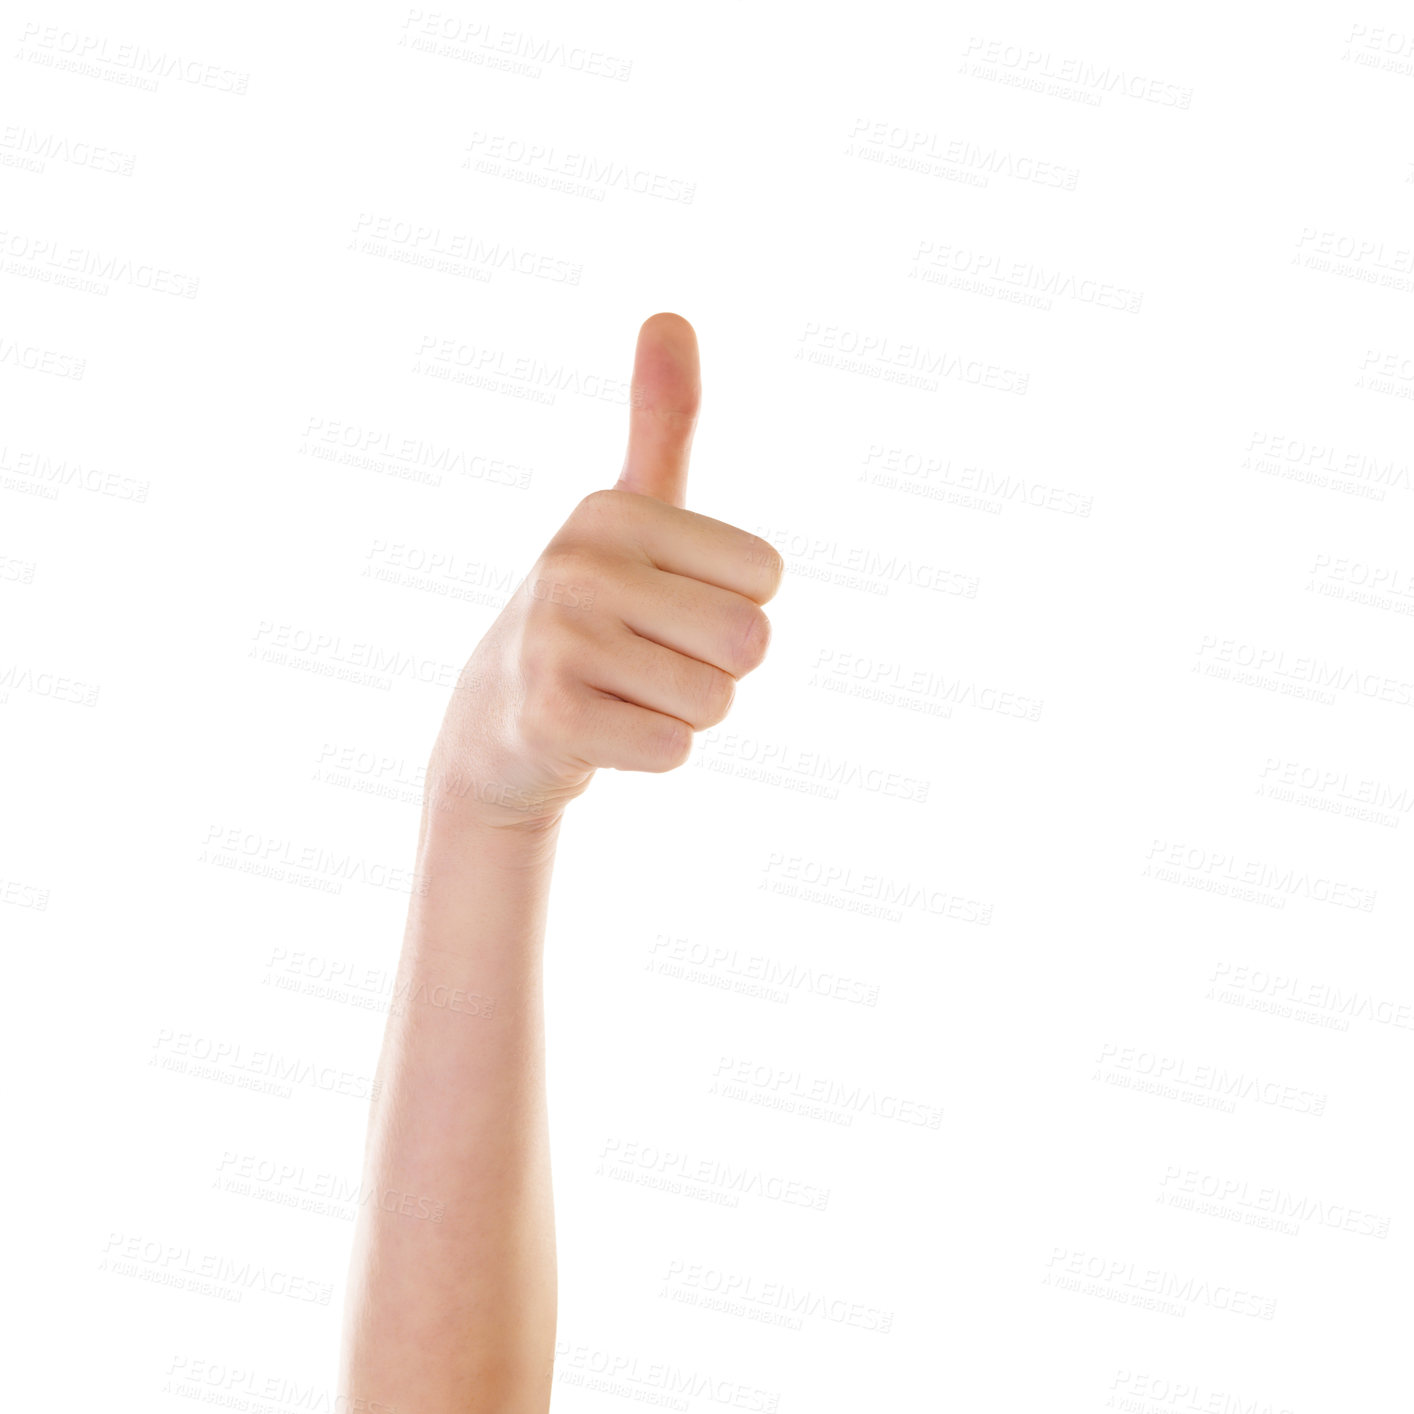 Buy stock photo Thumbs up, hand and winner hands of a person with yes, achievement and motivation gesture. White background, mock up and isolated model in a studio showing agreement, deal and satisfaction signs